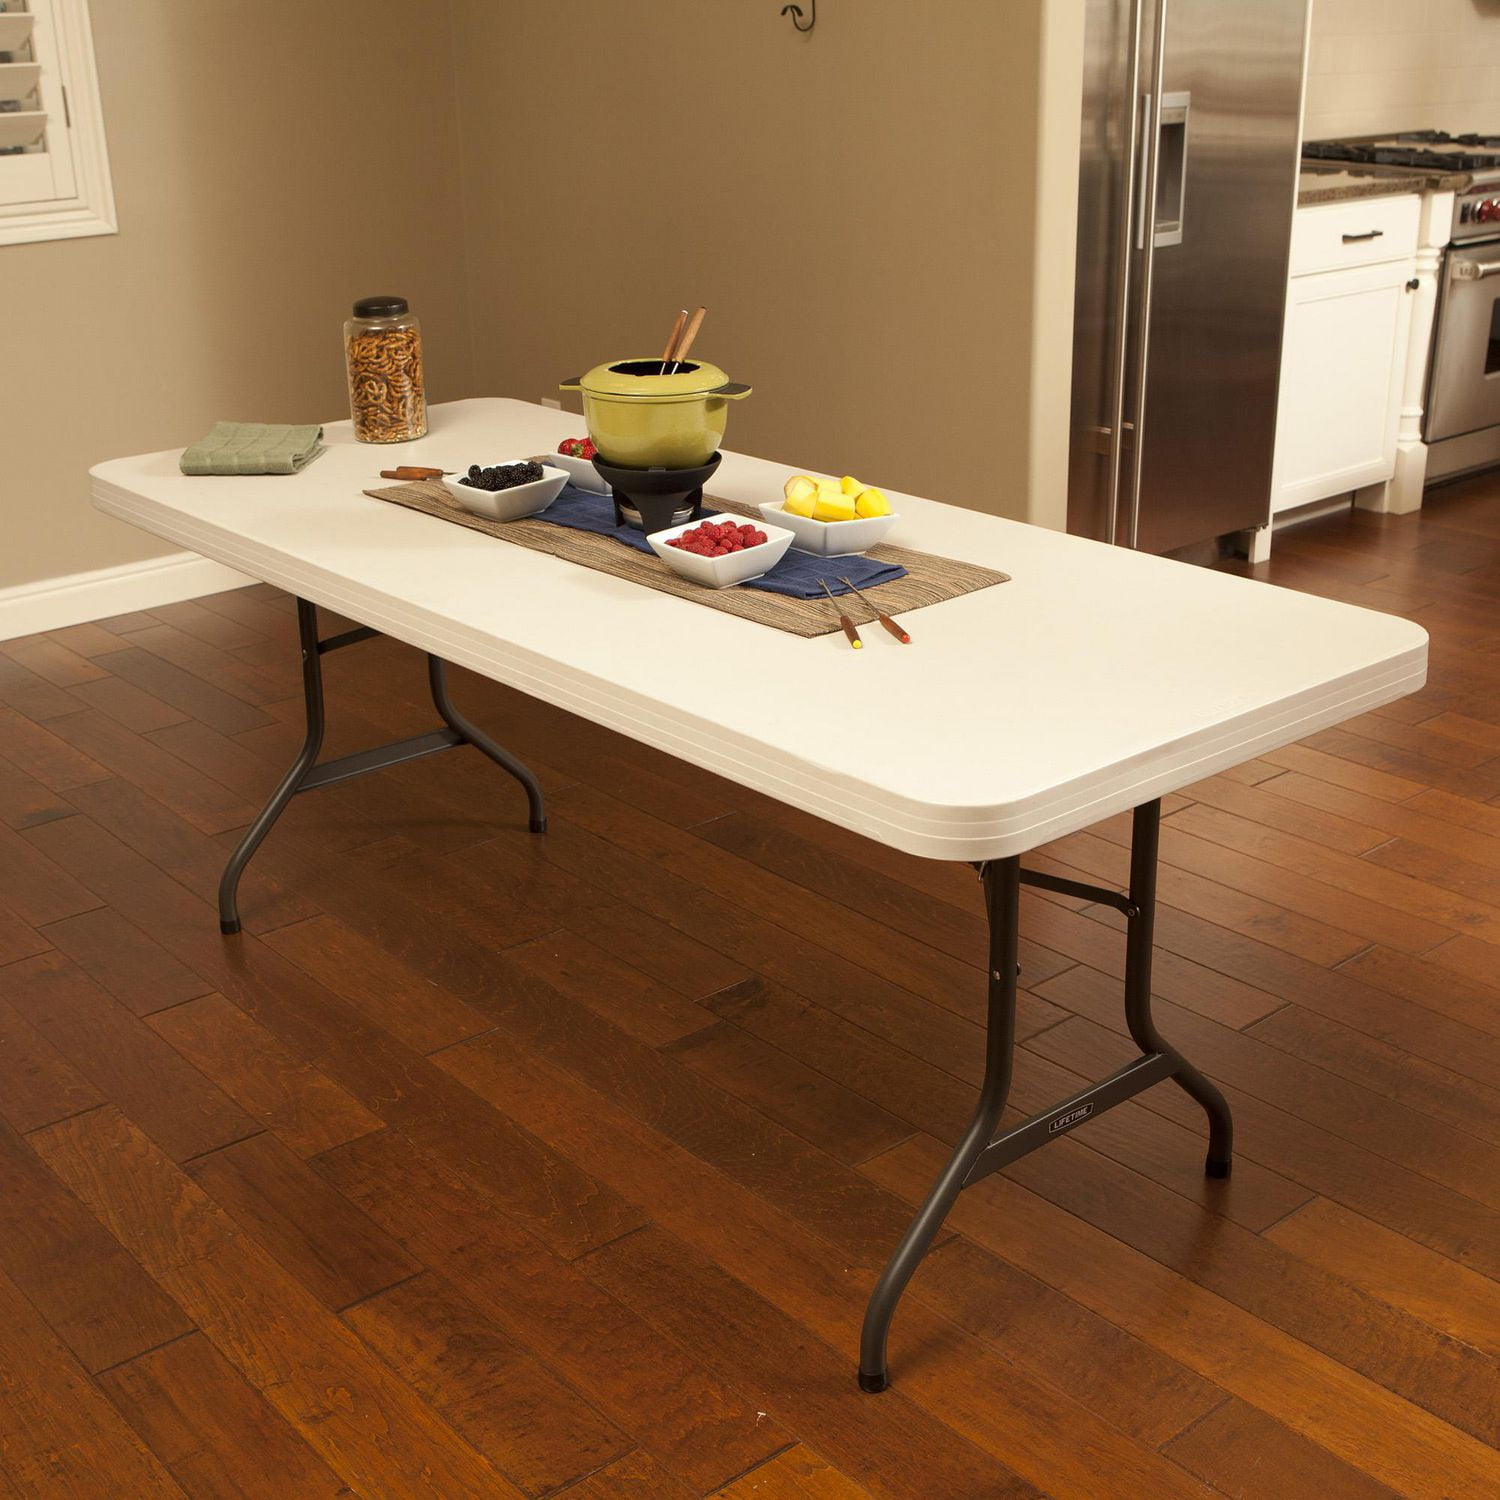 Lifetime 6-Foot Folding Table (Commercial) 